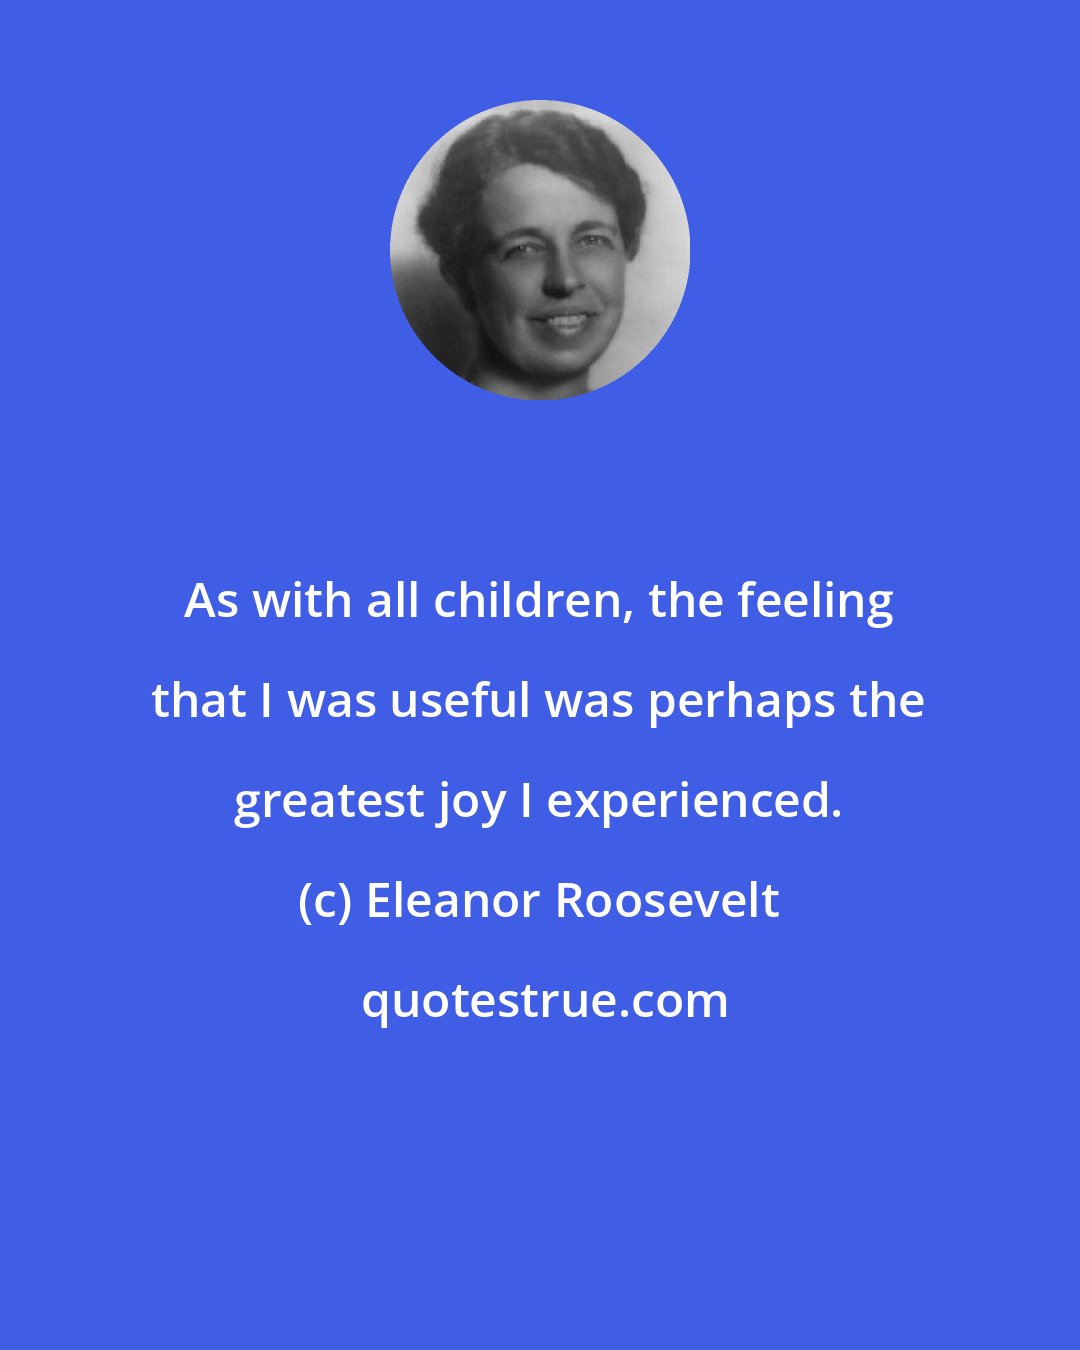 Eleanor Roosevelt: As with all children, the feeling that I was useful was perhaps the greatest joy I experienced.